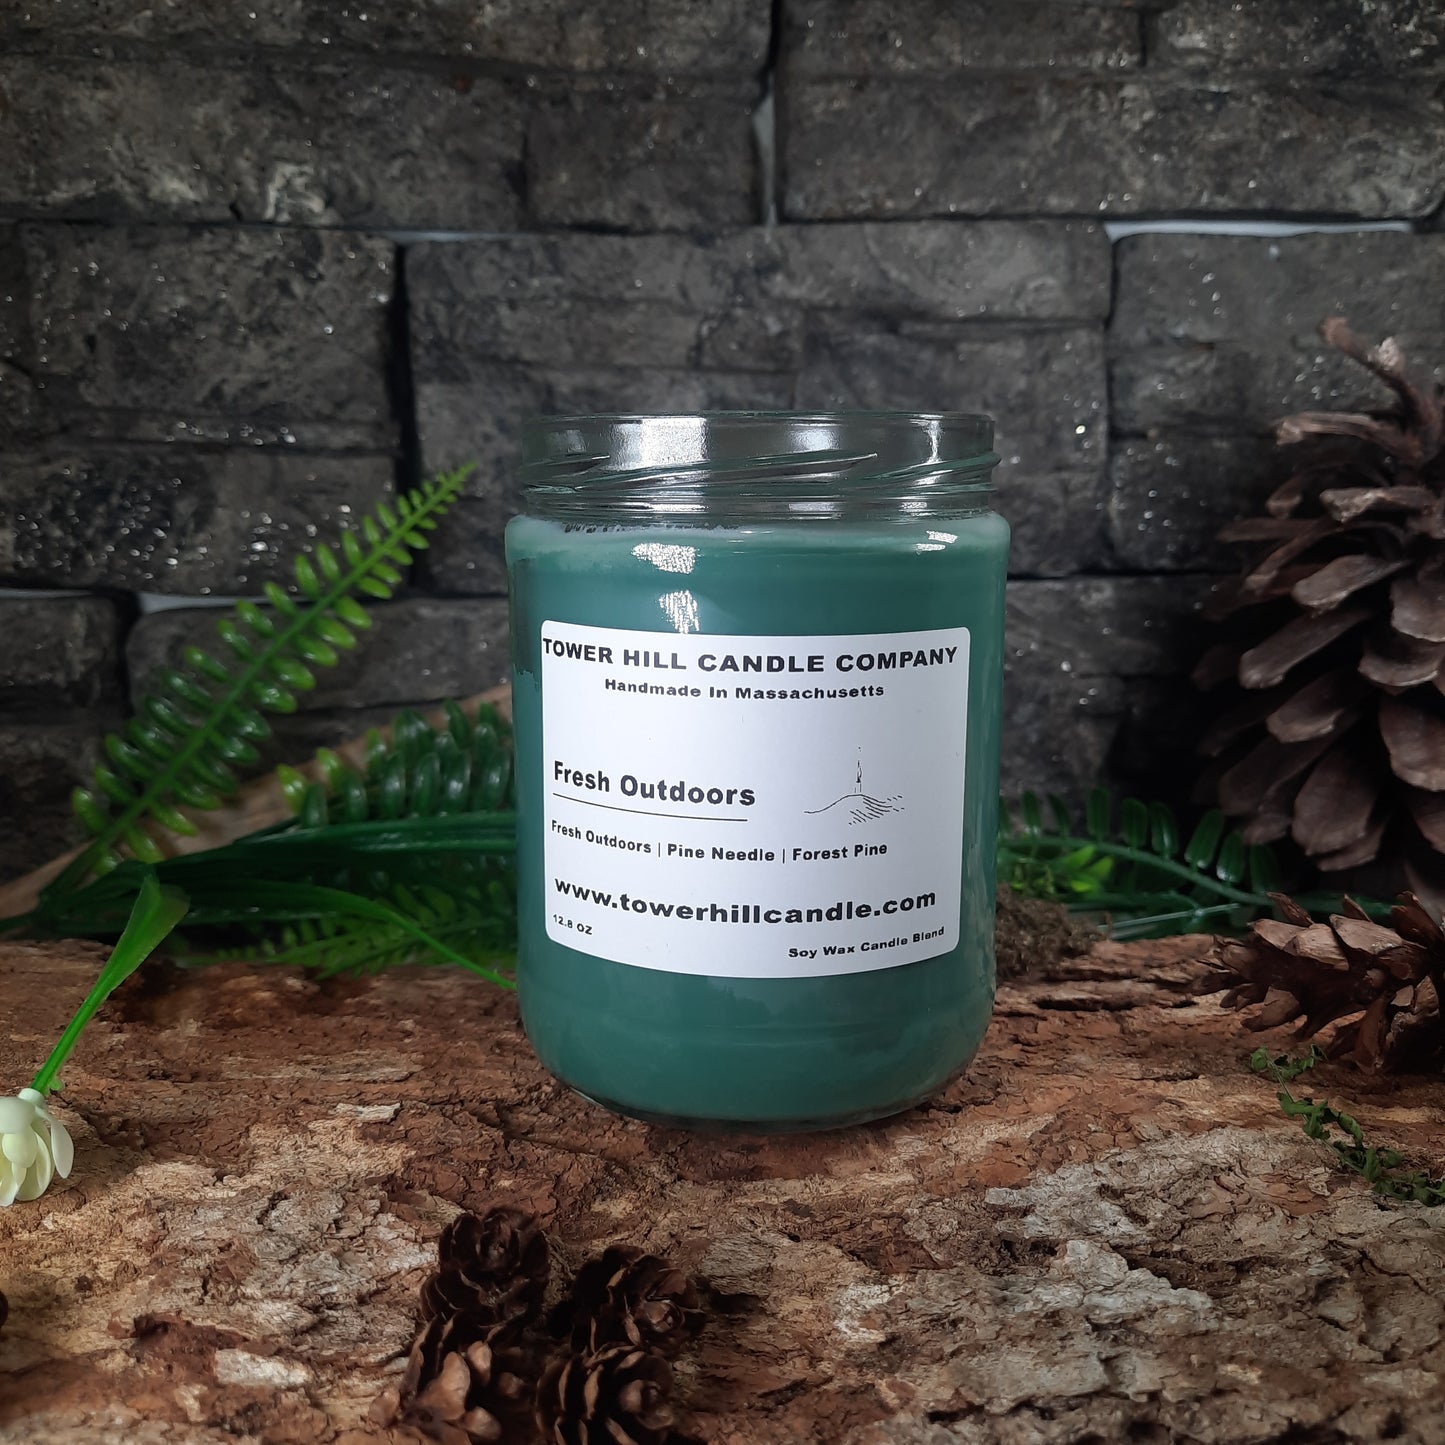 Fresh Outdoors 12.8oz Candle